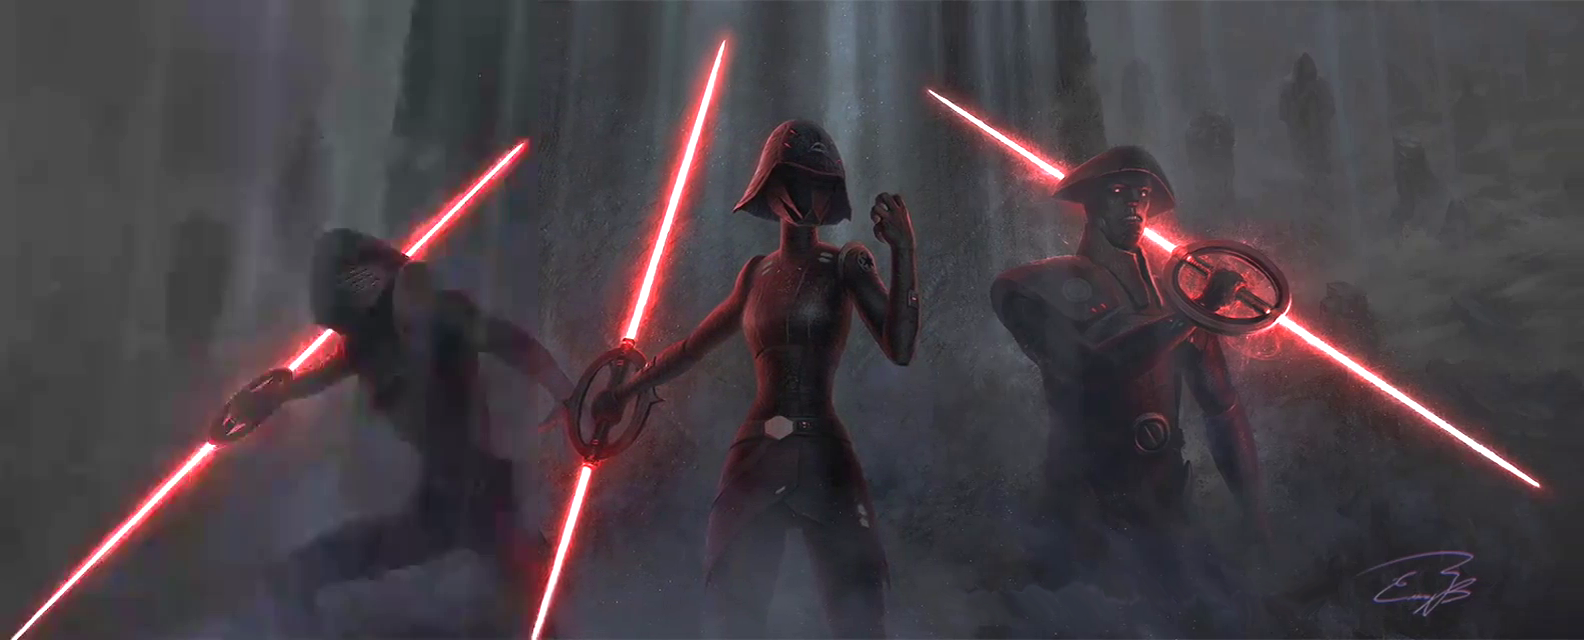 Now that we got a glimpse of the Inquisitors in Star Wars Rebels, one could presume that not all members will die in this series unless the producers decide to link both stories at a given point. For now, we will have to see how Obi-Wan Kenobi deals with this group of assassins led by his former friend.